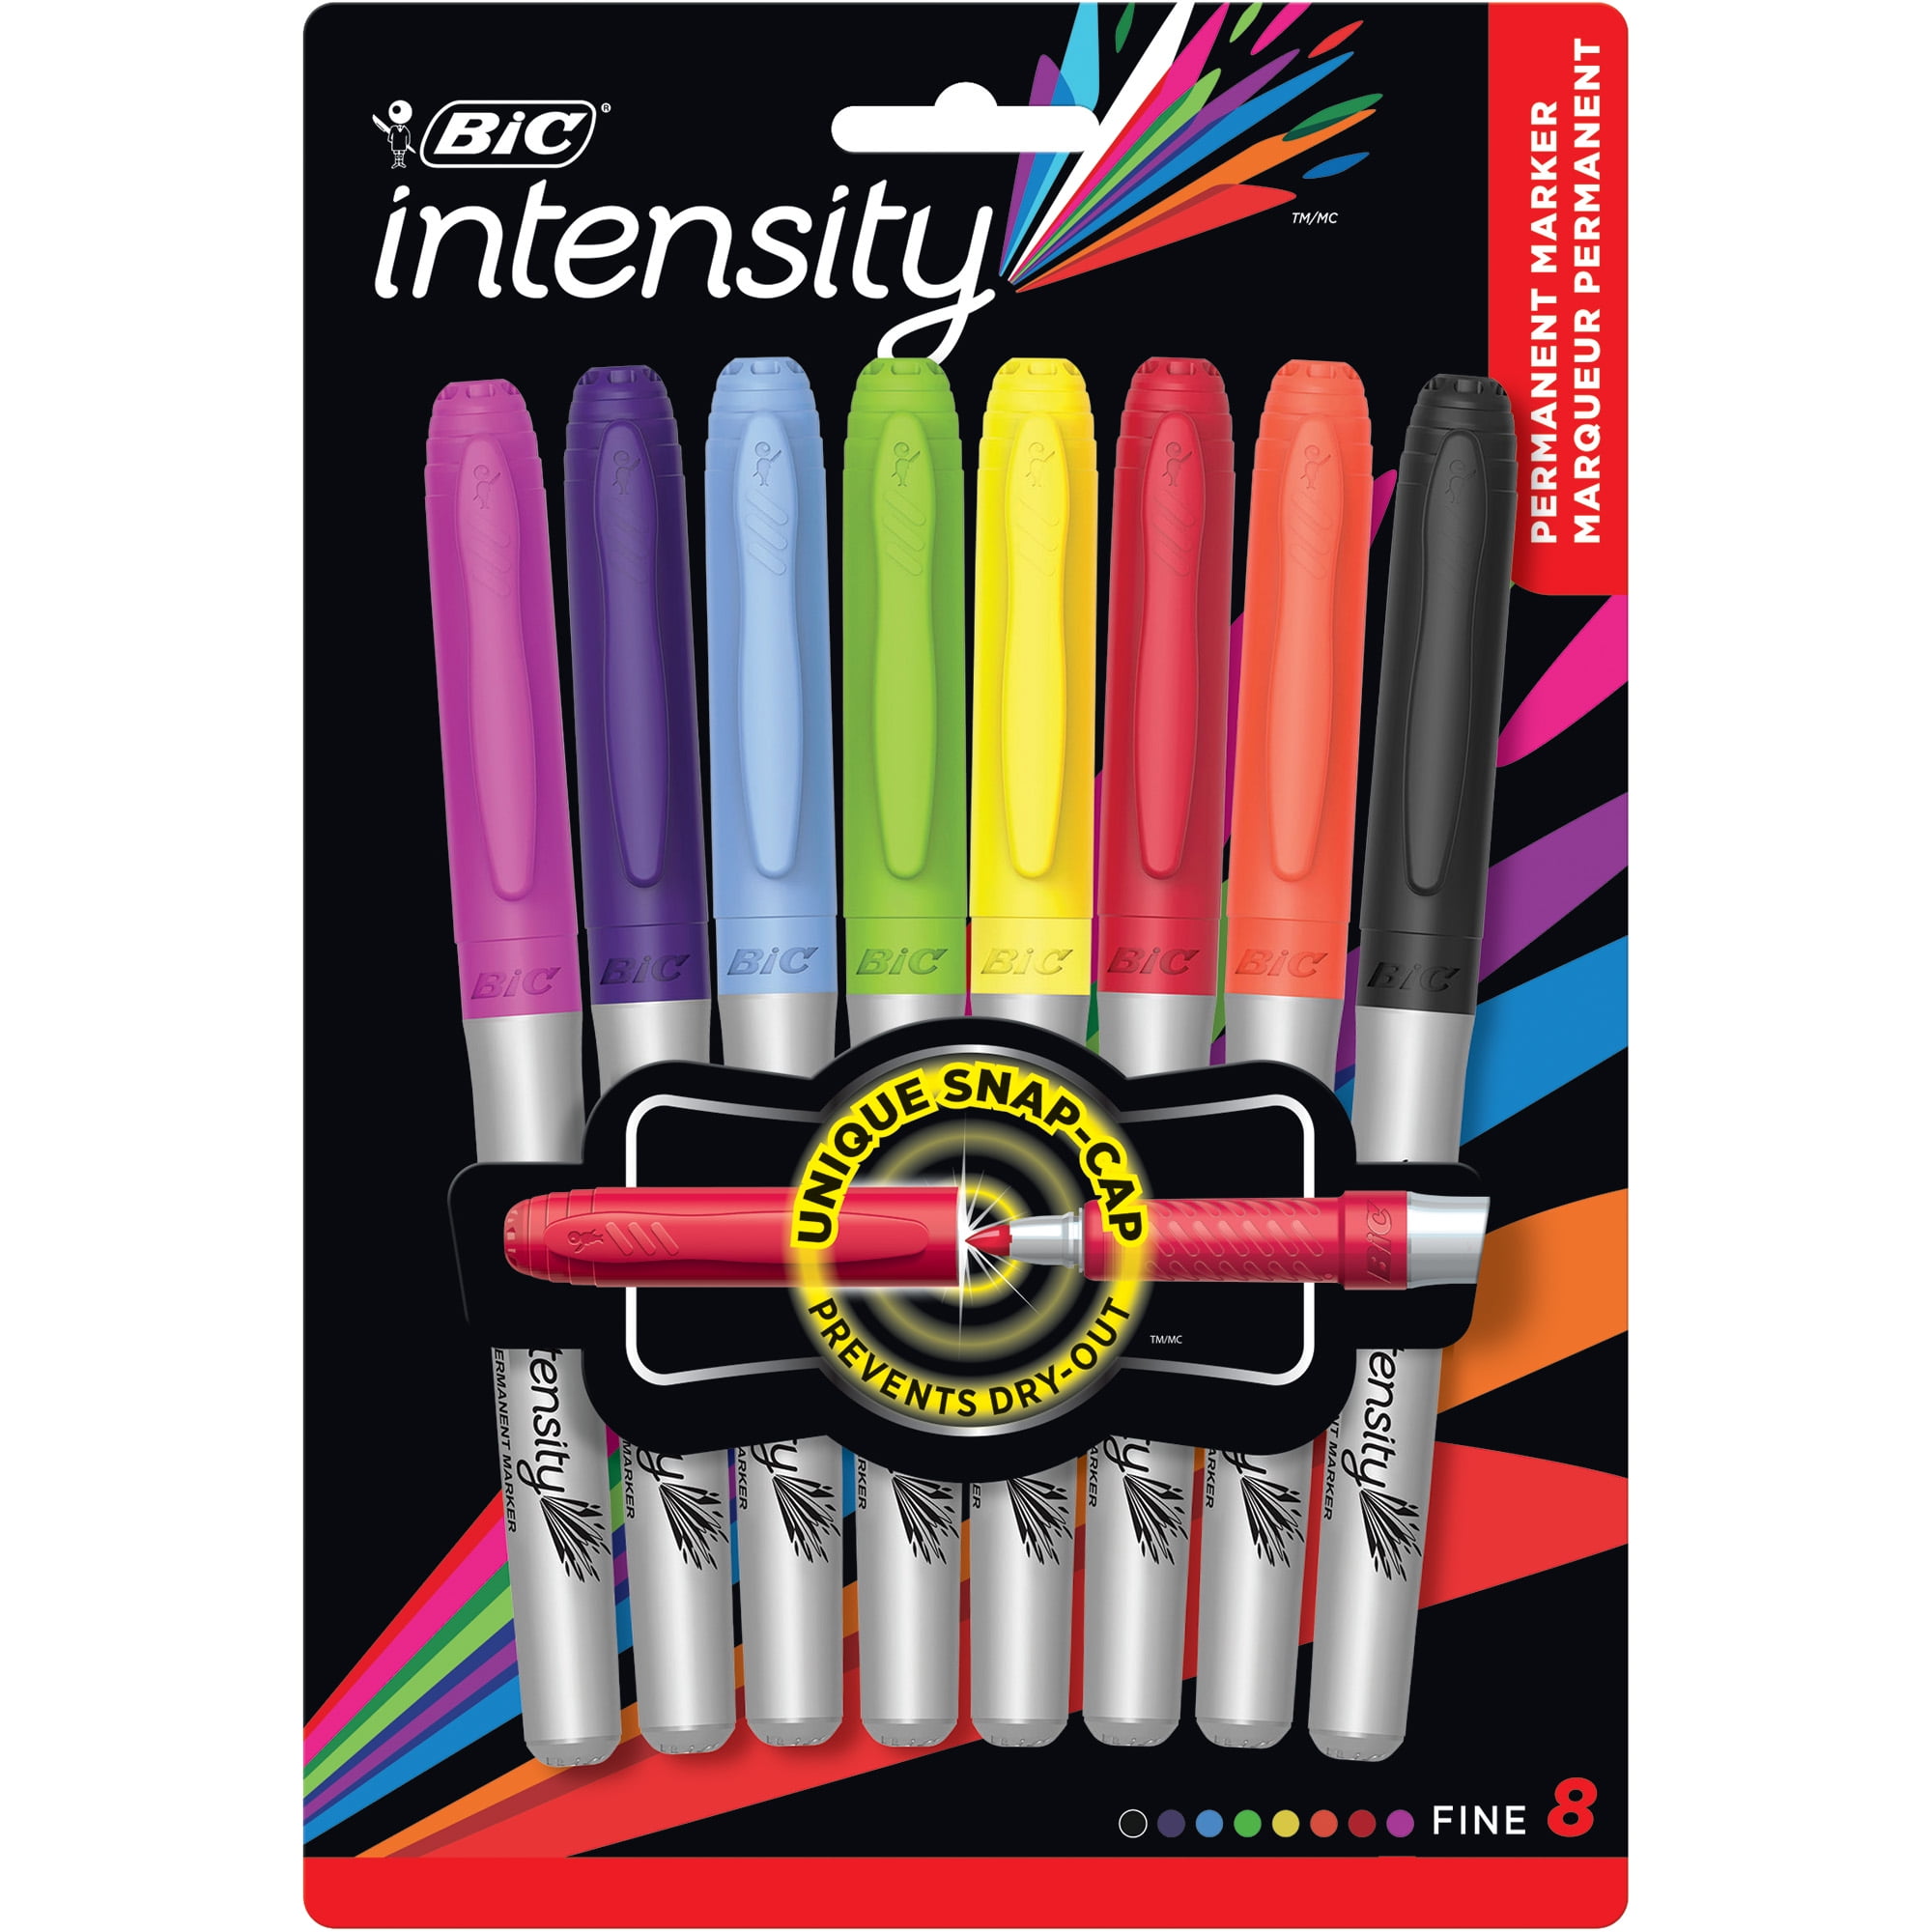 BIC Intensity Fashion Permanent Marker, Fine Point, Assorted Colors, 8 Count